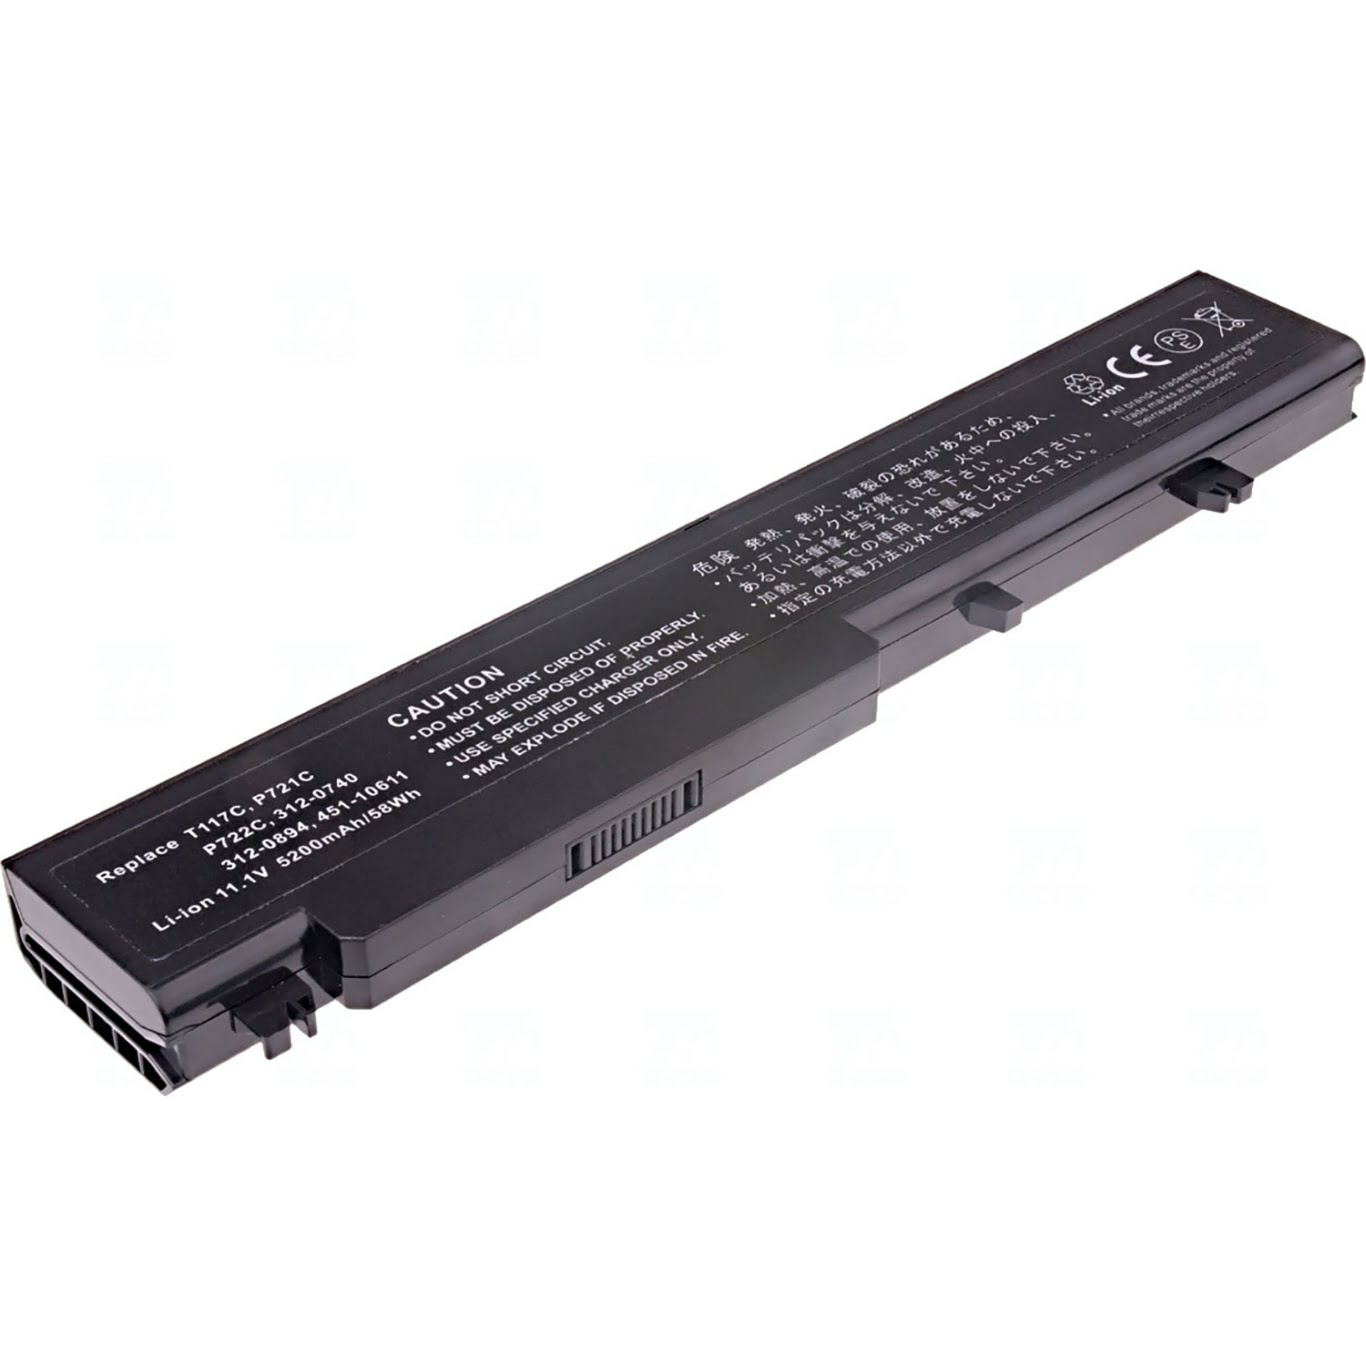 Dell 0g278c, 0g279c Laptop Battery For V1710, V1710n replacement